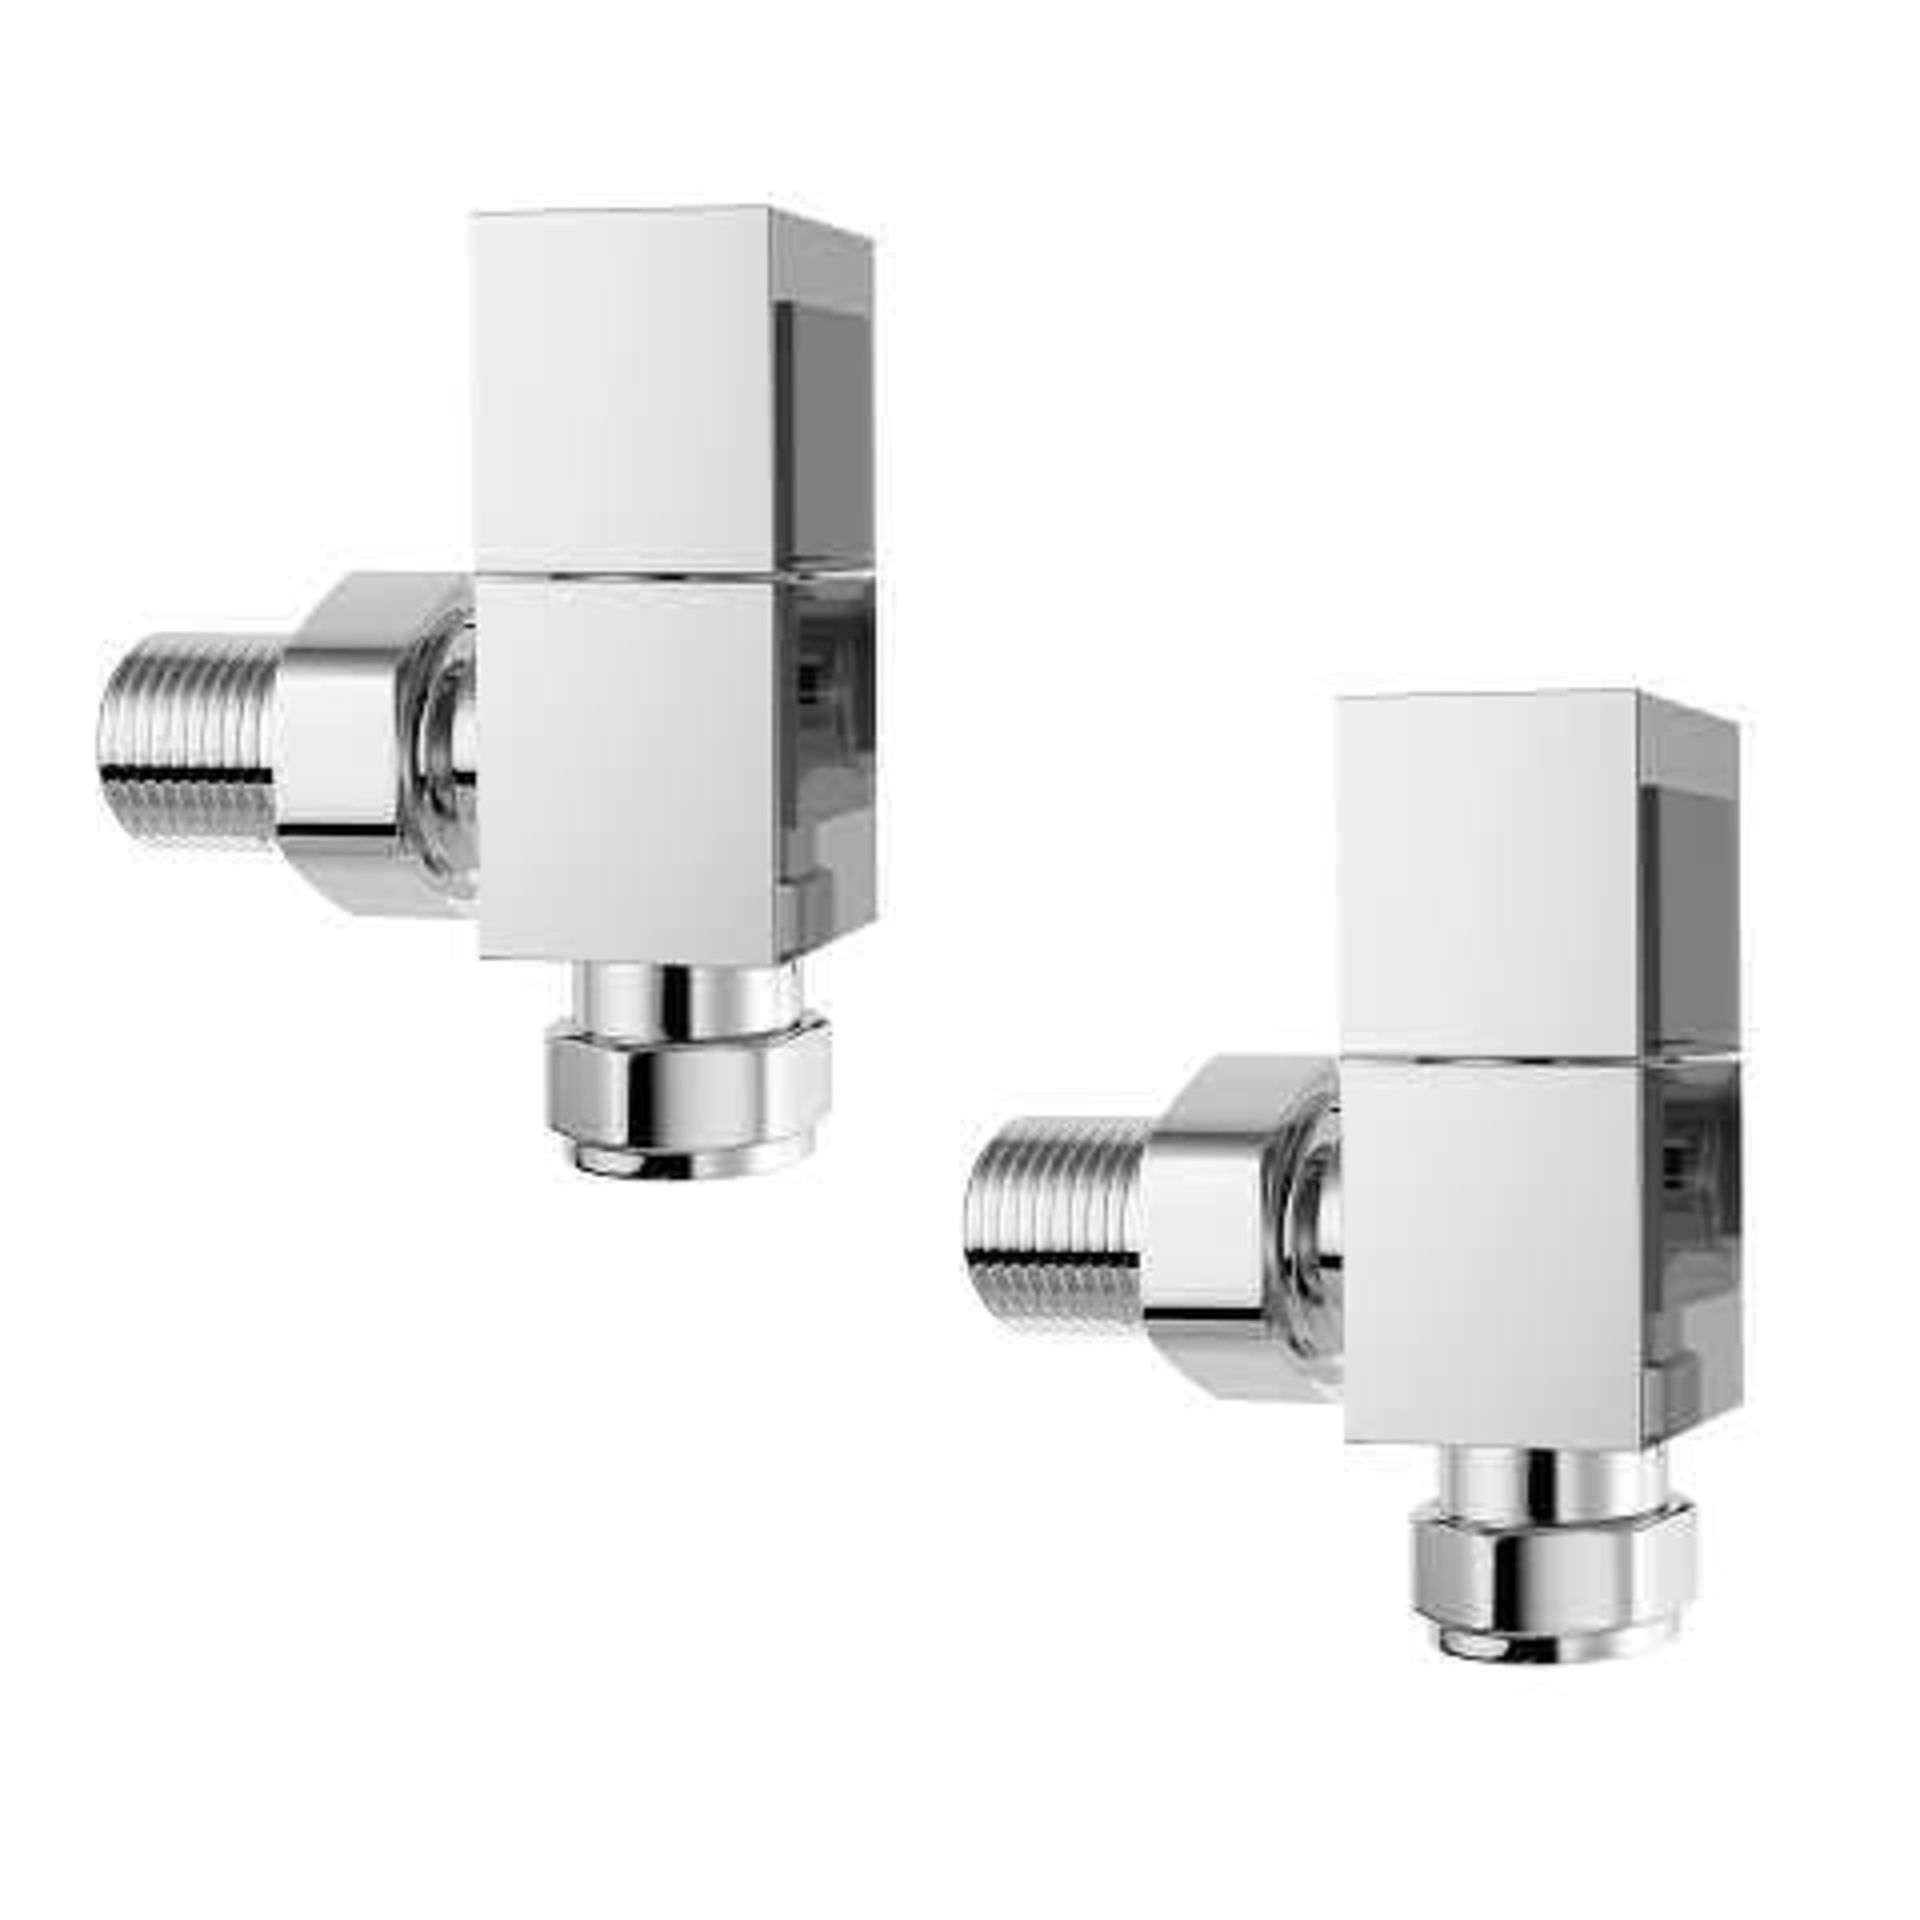 (H121) 15mm Standard Connection Square Angled Chrome Radiator Valves Made of solid brass, our Angled